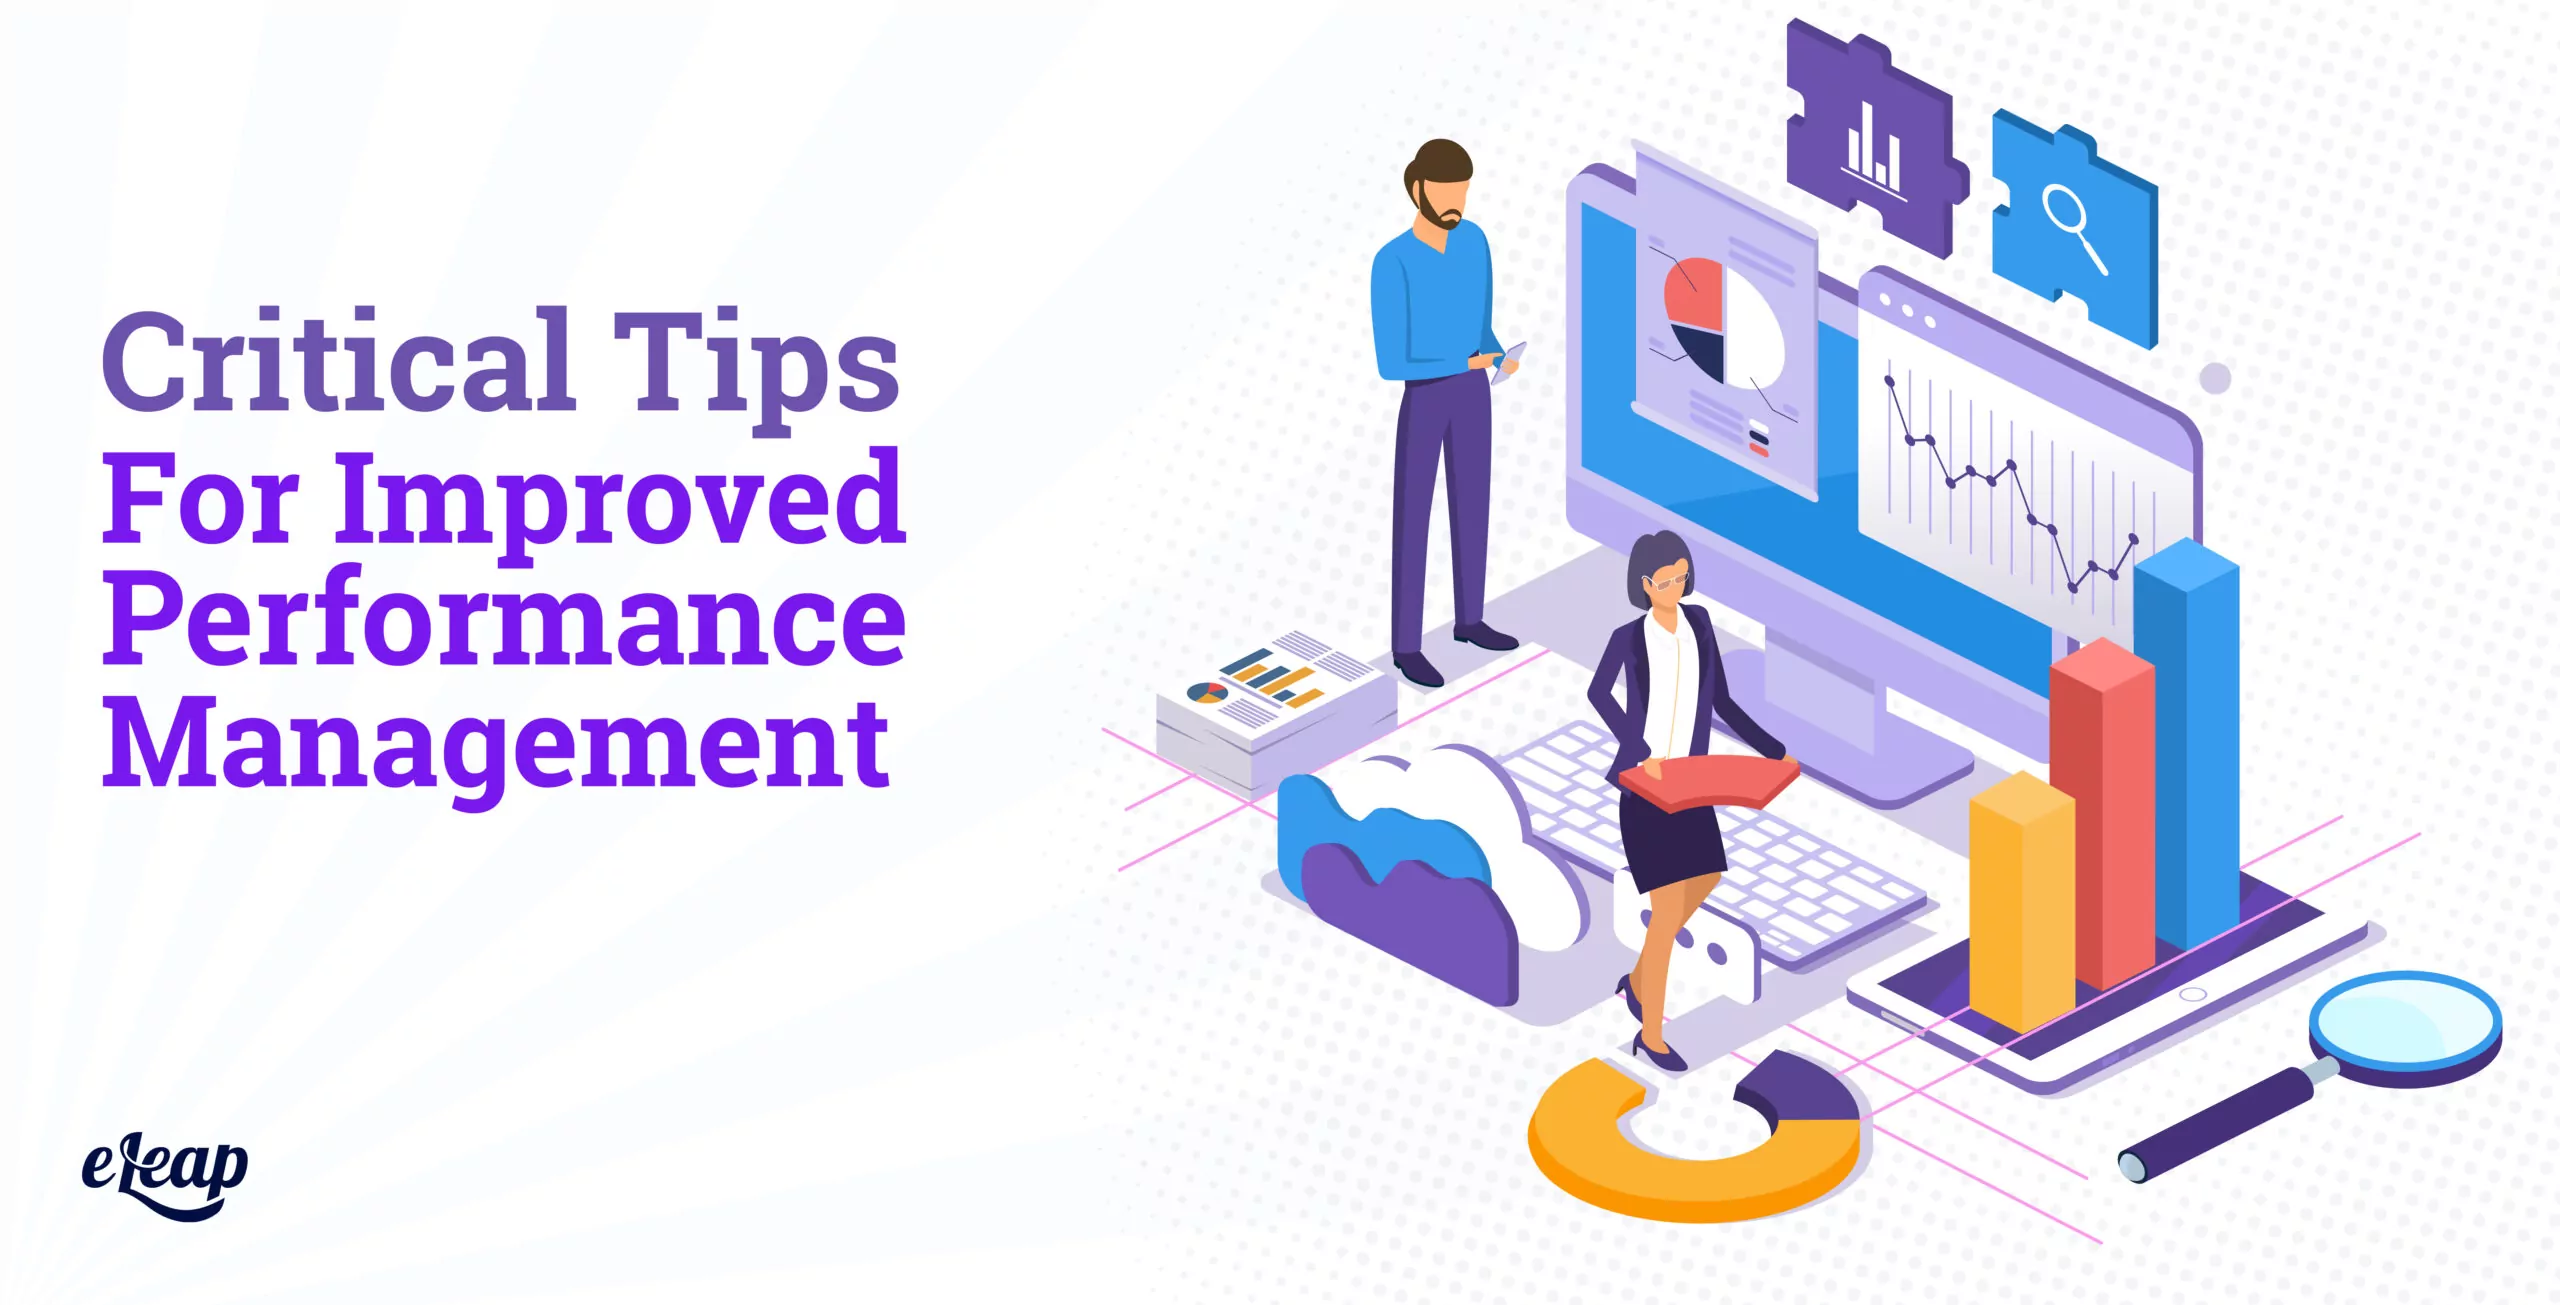 Critical Tips for Improved Performance Management